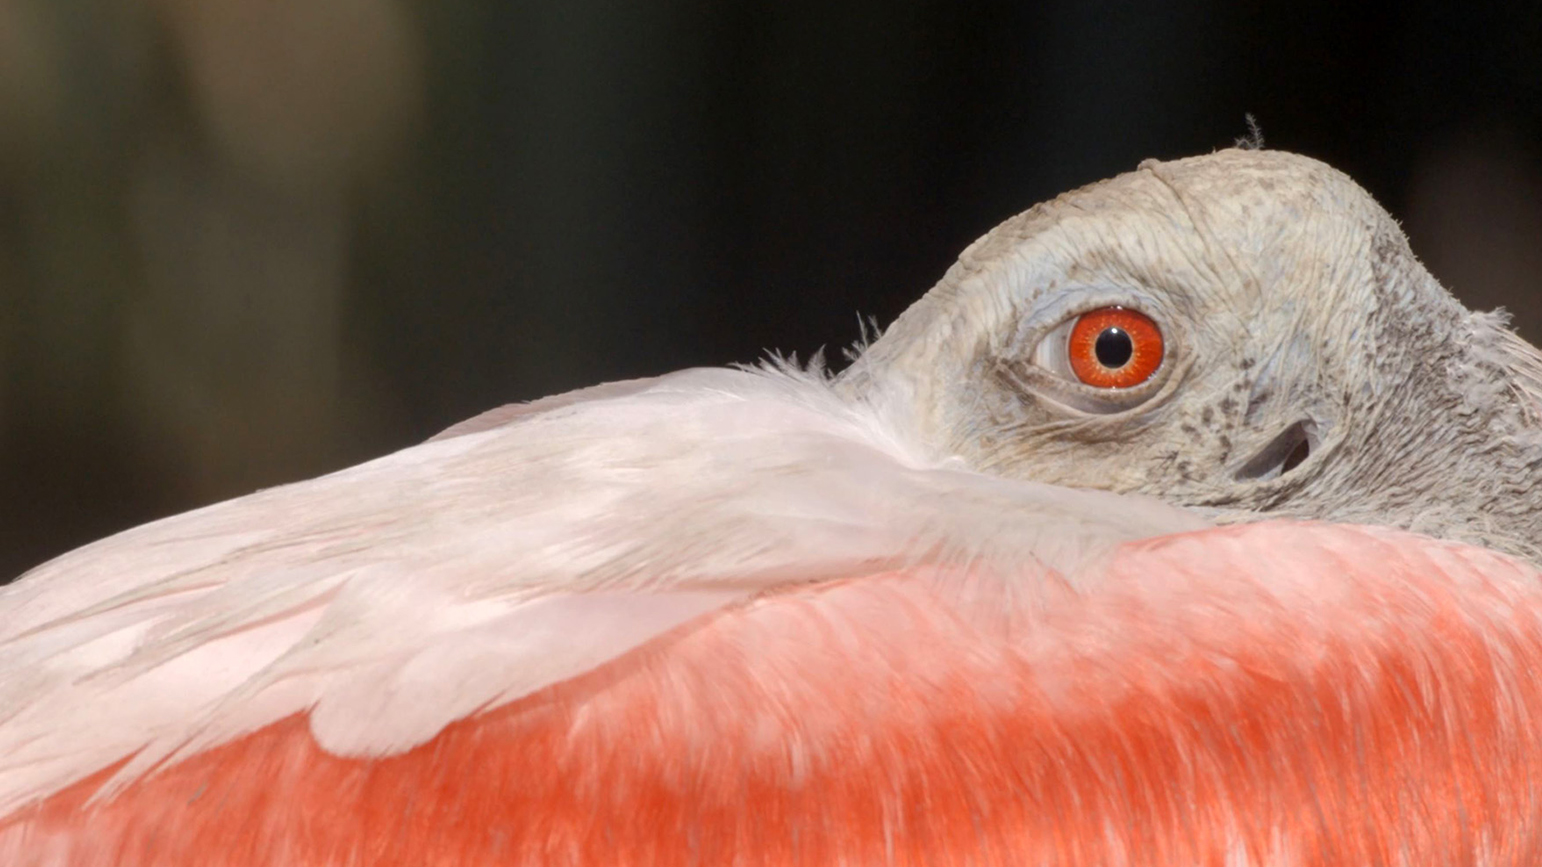 Close up image of a pink bird with a red eye